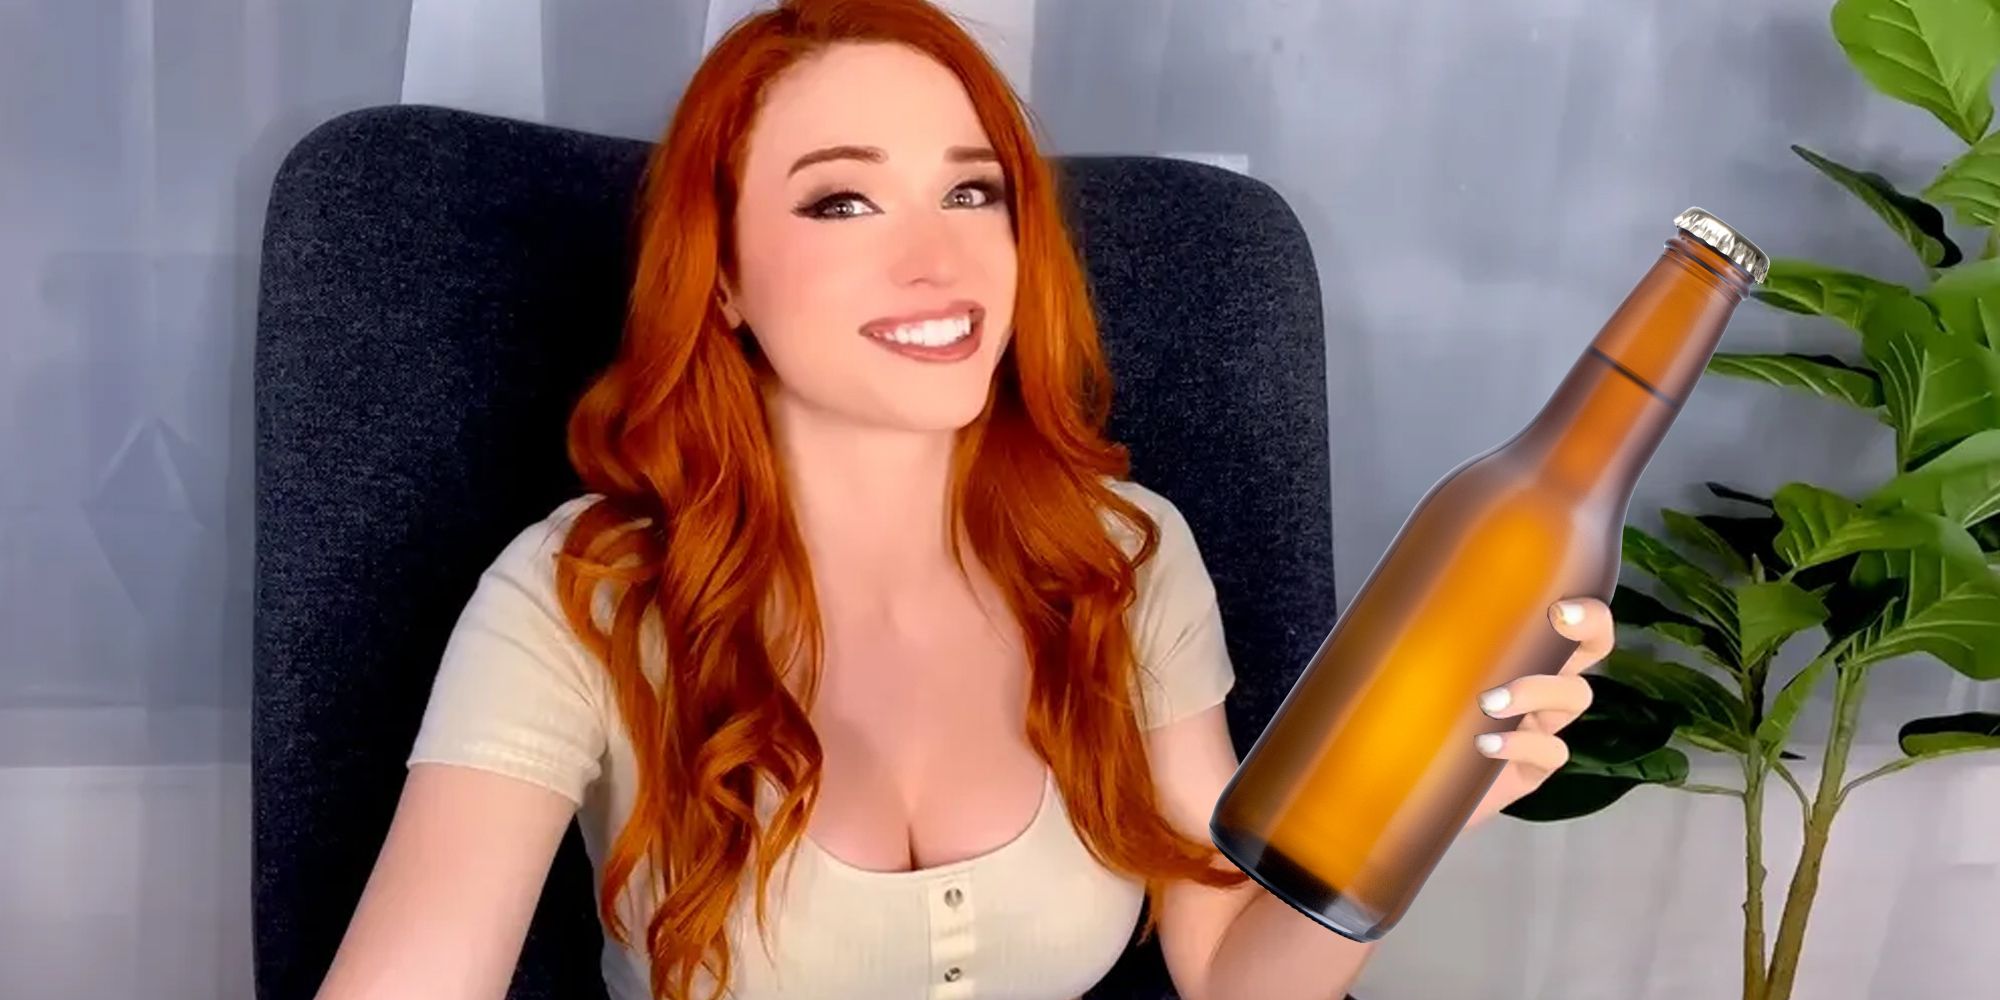 Amouranth holding a bottle of beer.